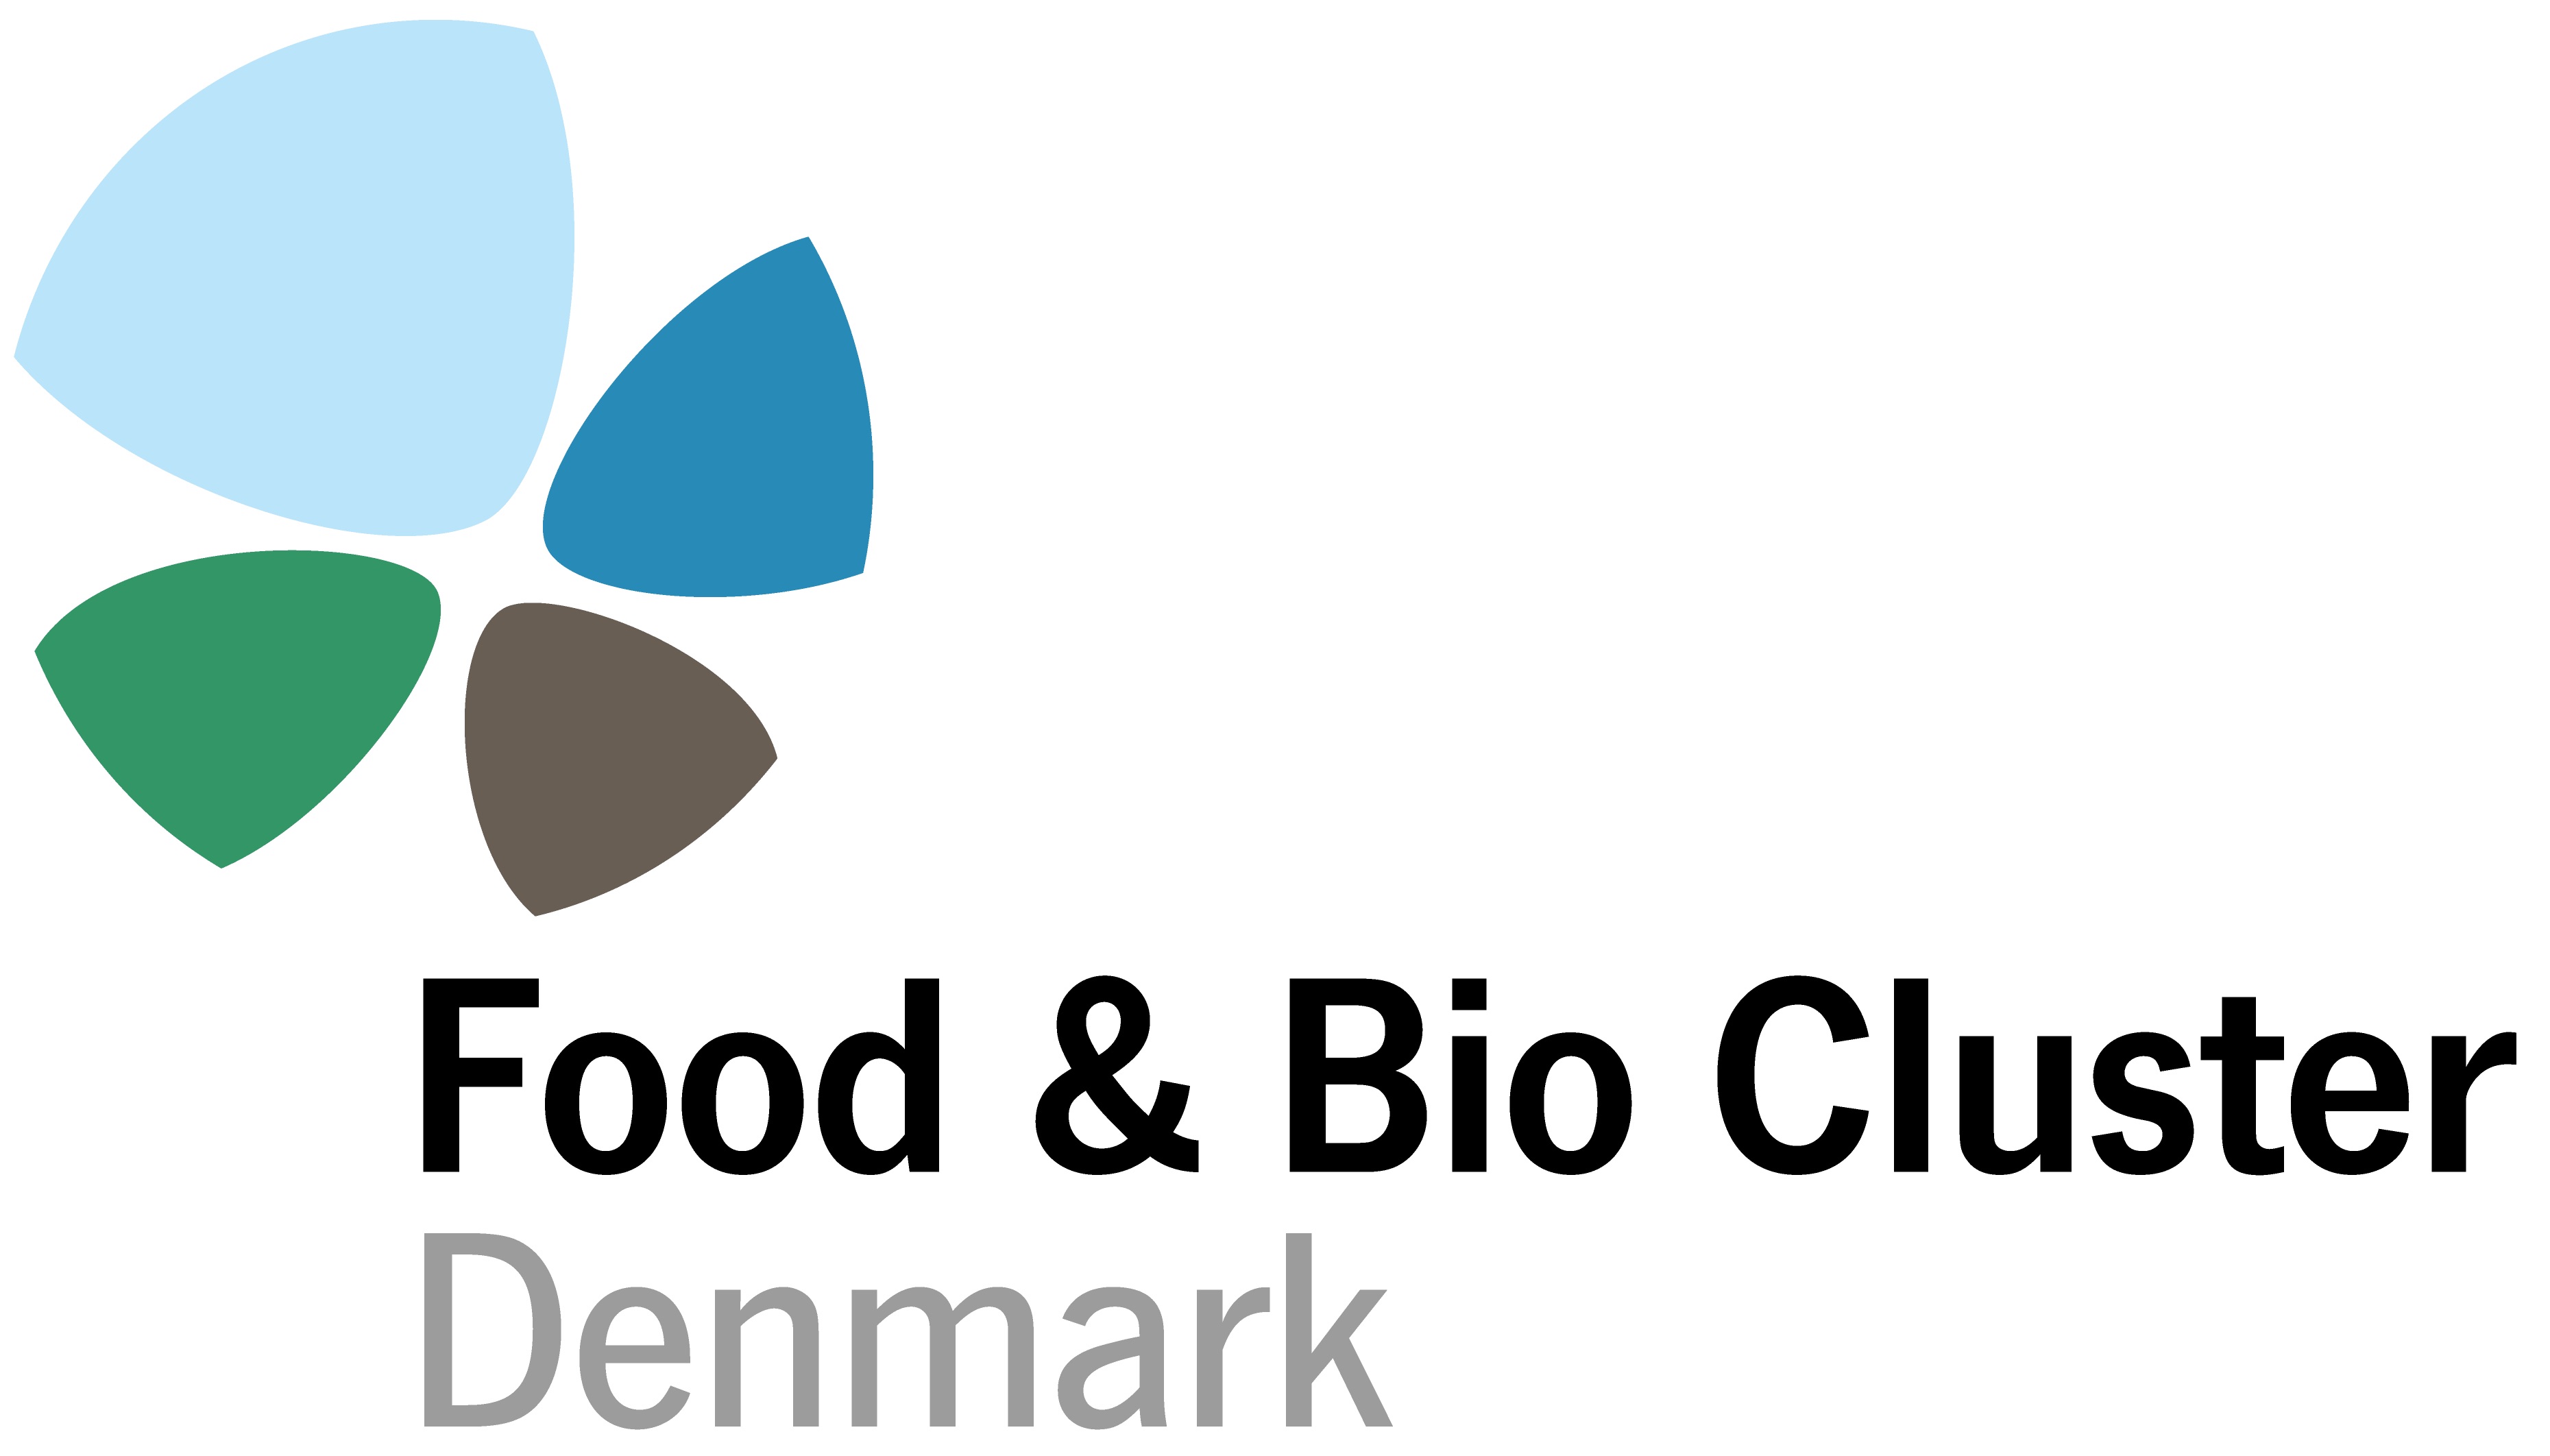 Food and Bio Cluster Denmark